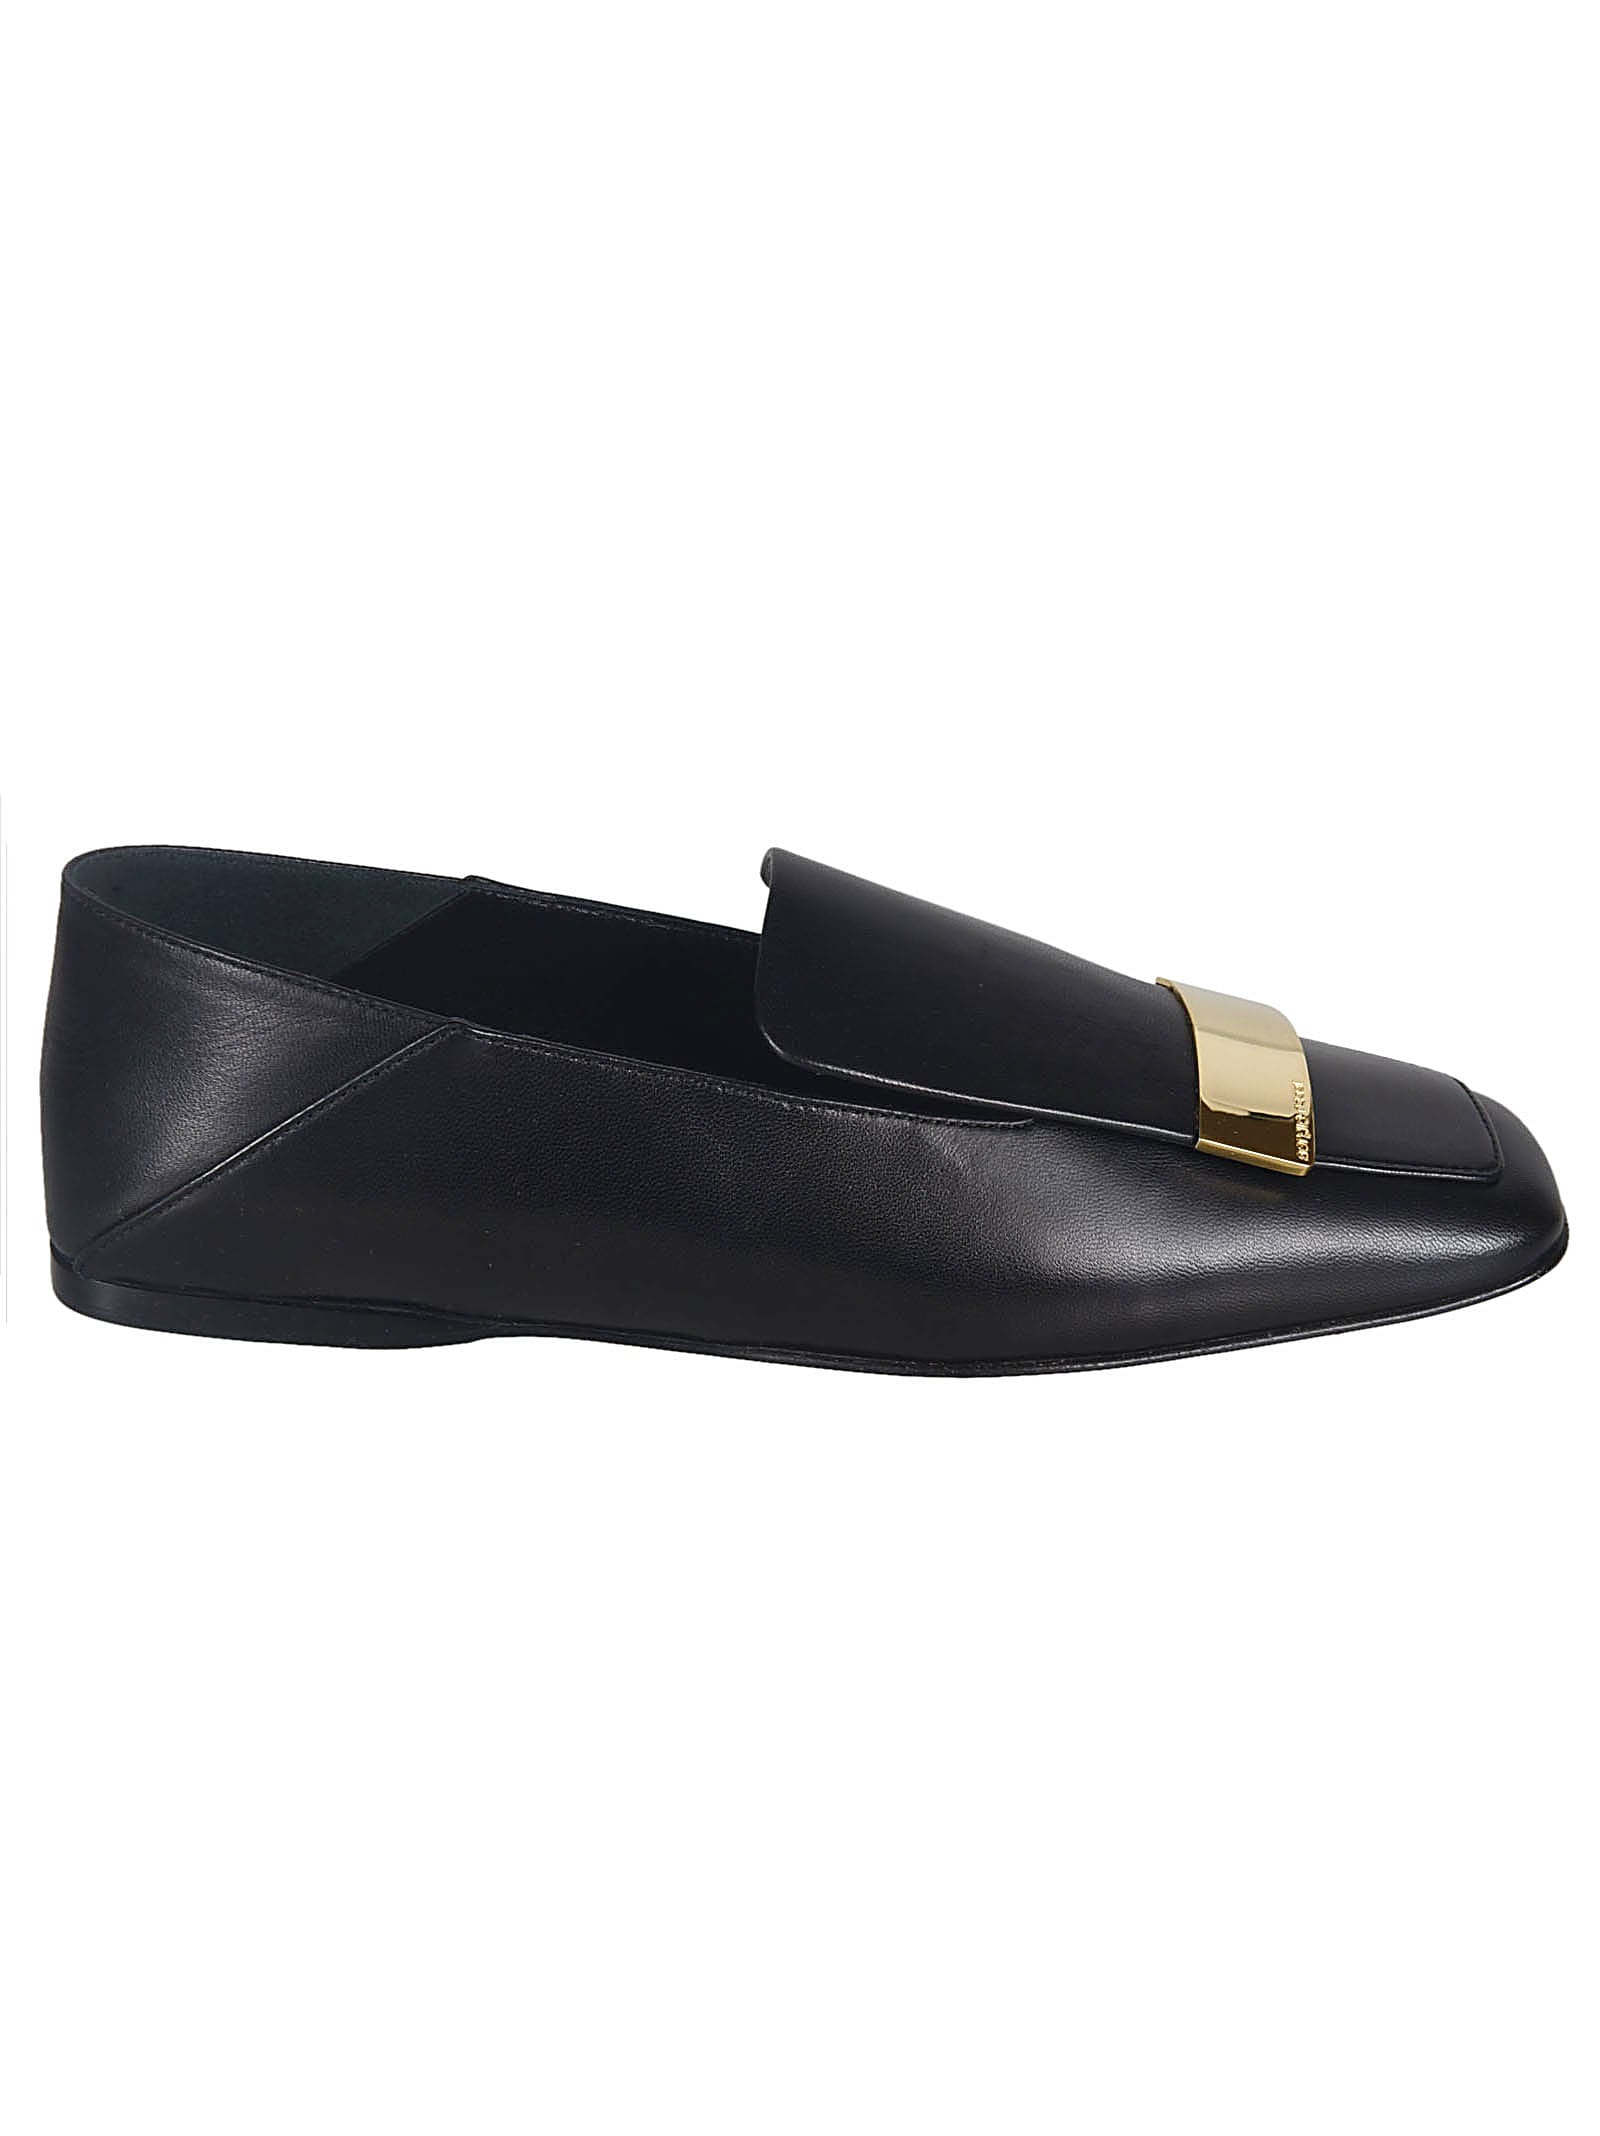 Buy Sergio Rossi Flat Shoes online, shop Sergio Rossi shoes with free shipping